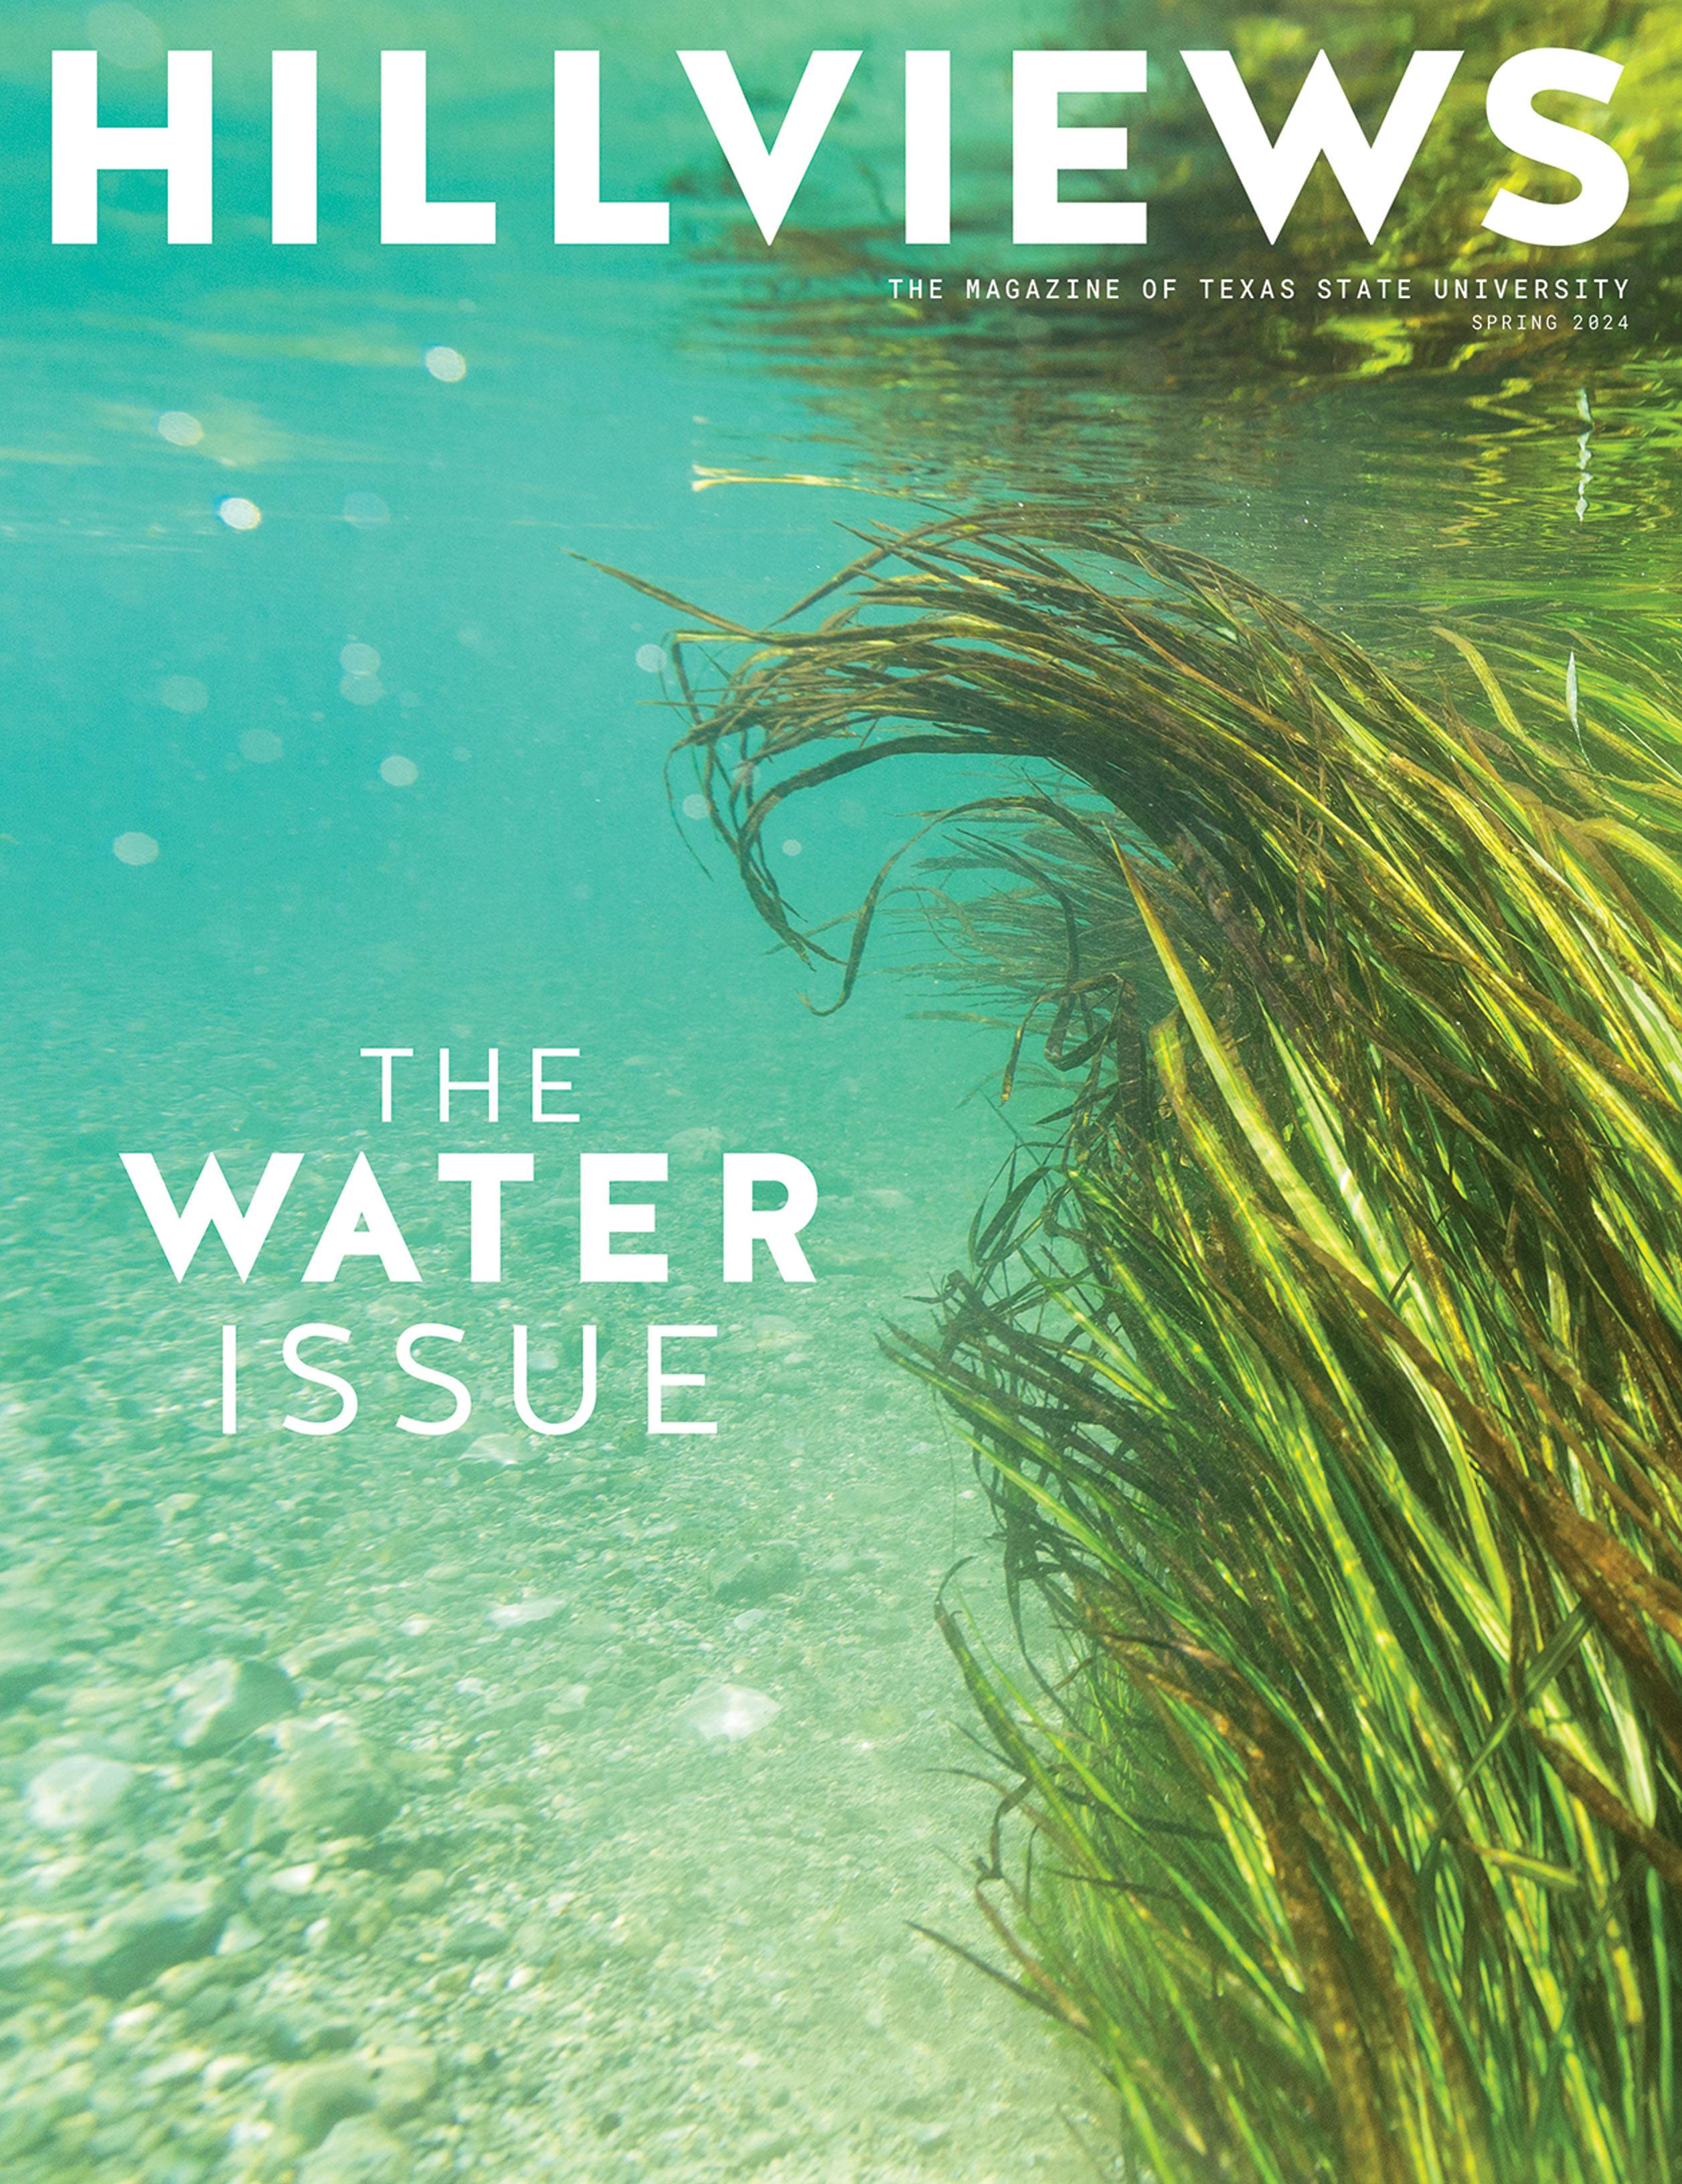 underwater photo of wild texas rice with "hillviews magazine" and "the water issue" written on it